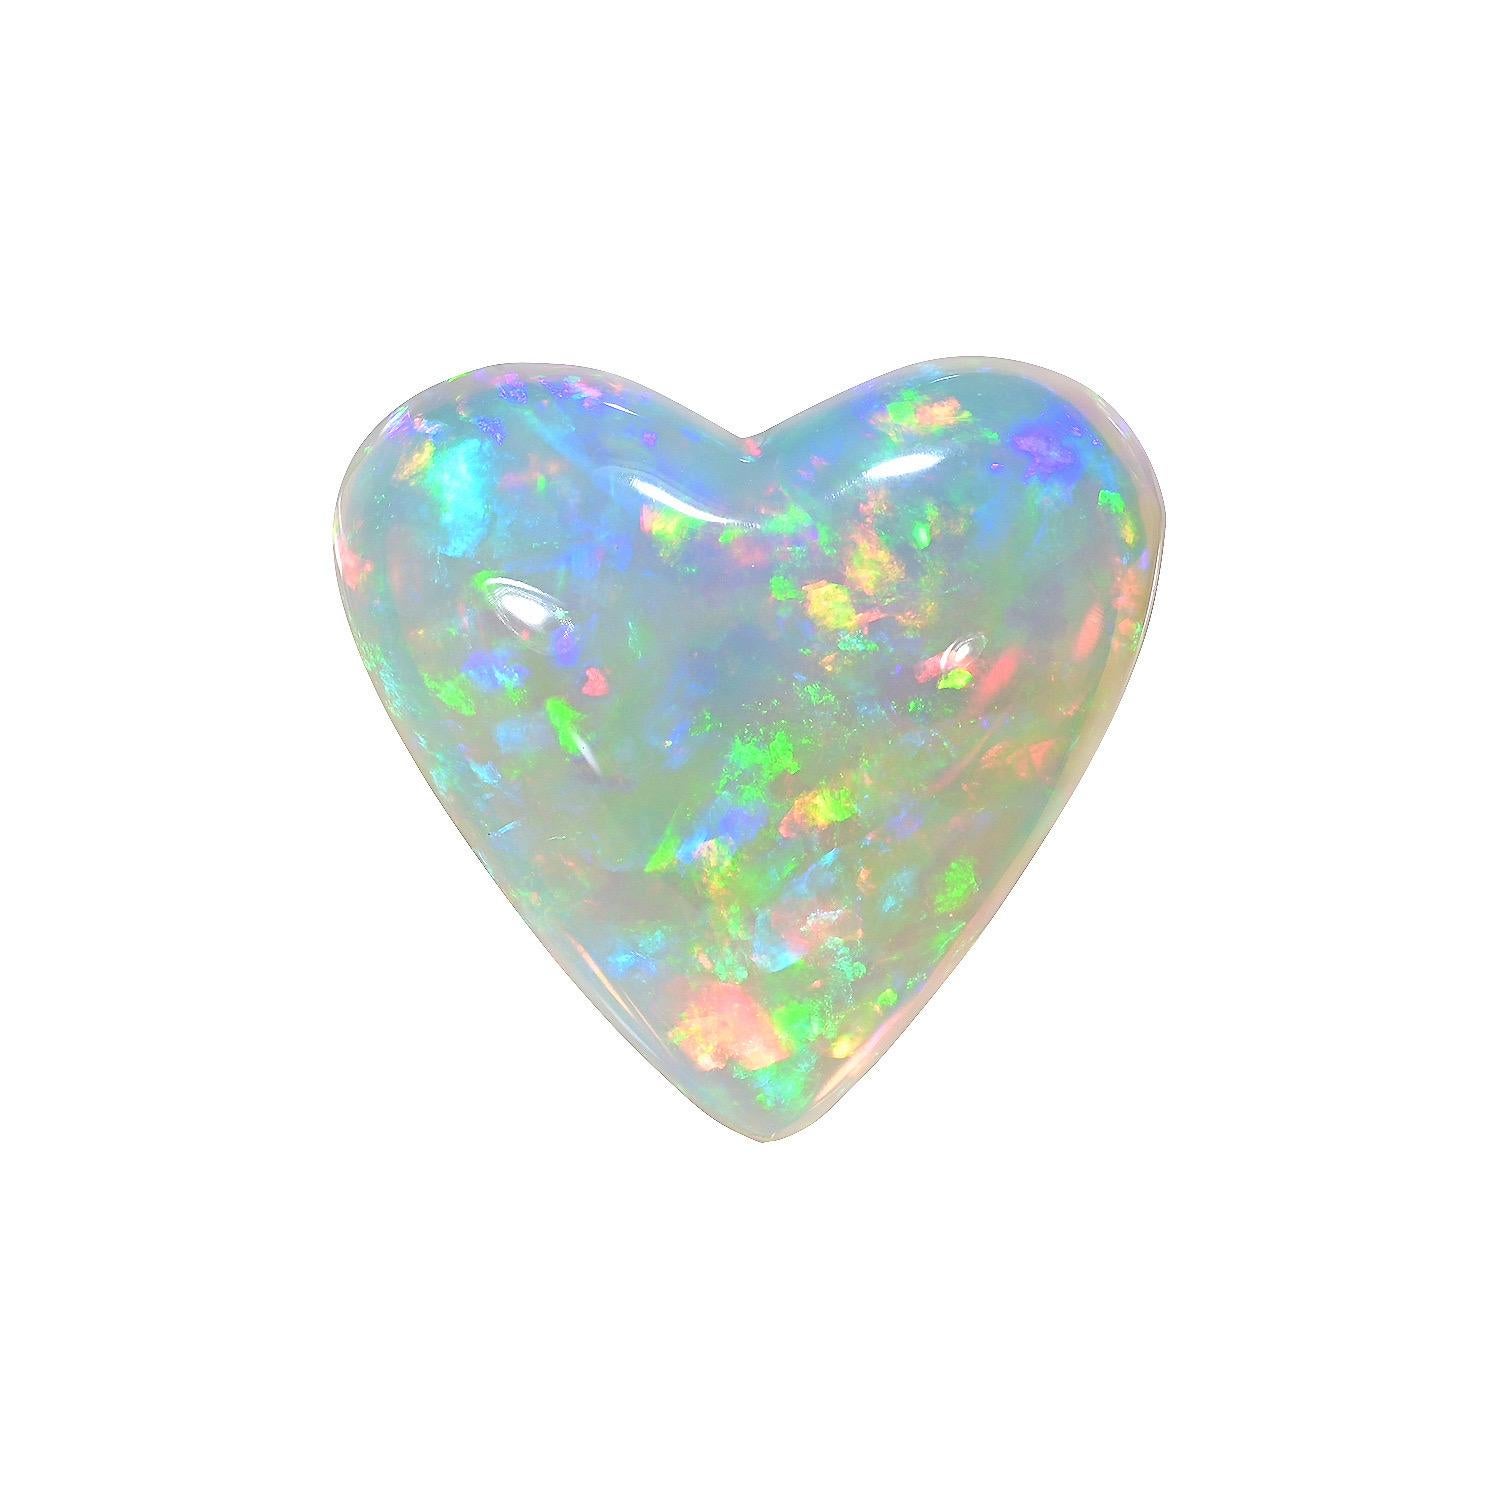 Contemporary Opal Stone 17.23 Carat Heart Shape Natural Ethiopian Loose Gemstone For Sale